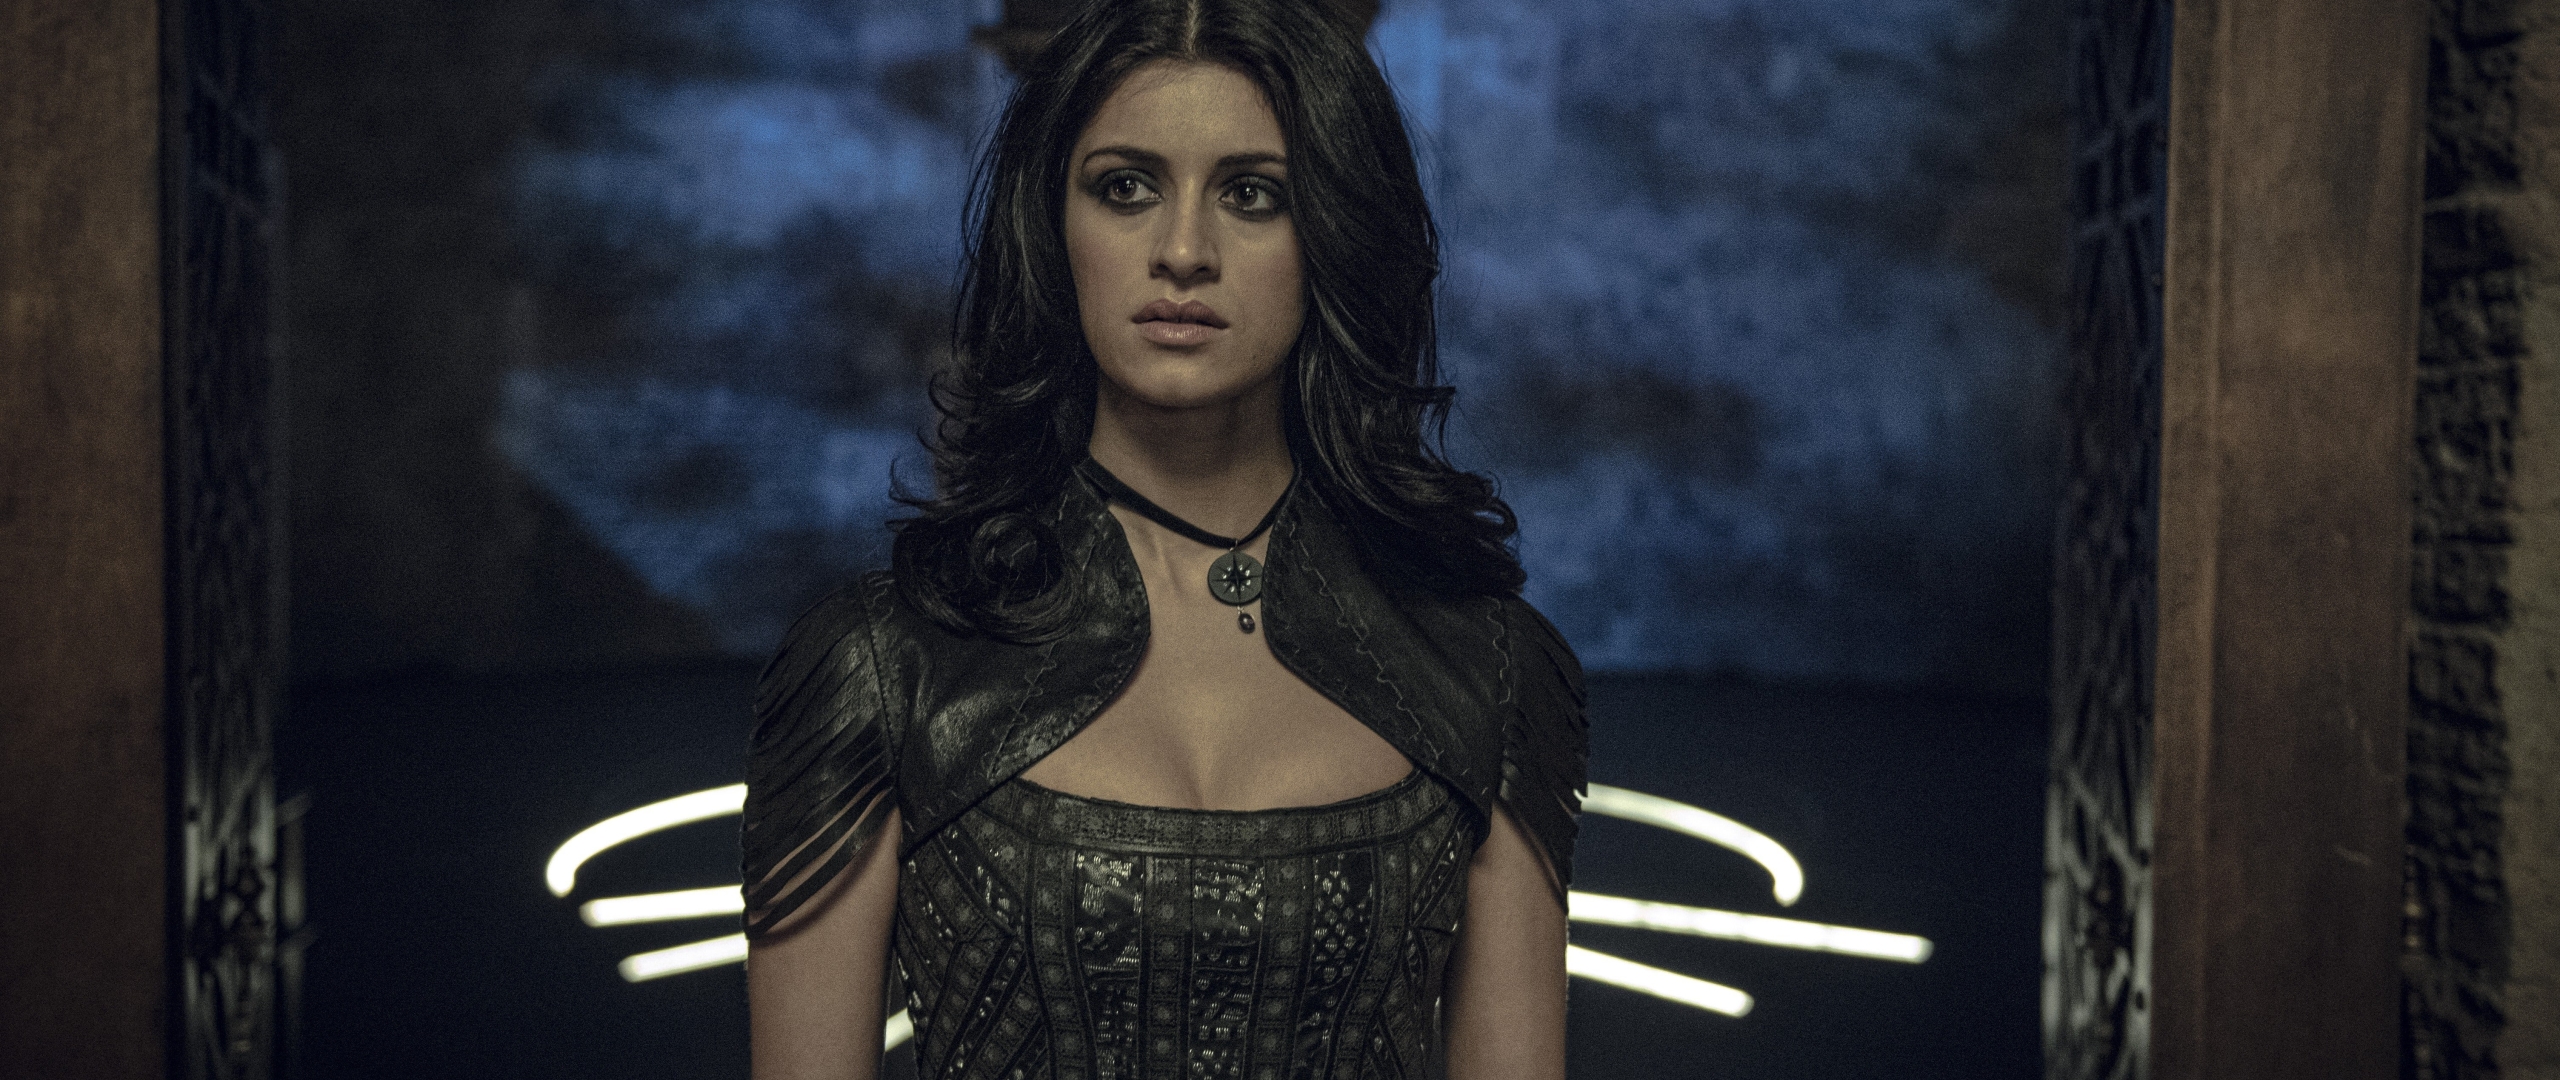 Anya Chalotra As Yennefer 2560x1080 Resolution Wallpaper, HD TV Series 4K Wallpaper, Image, Photo and Background